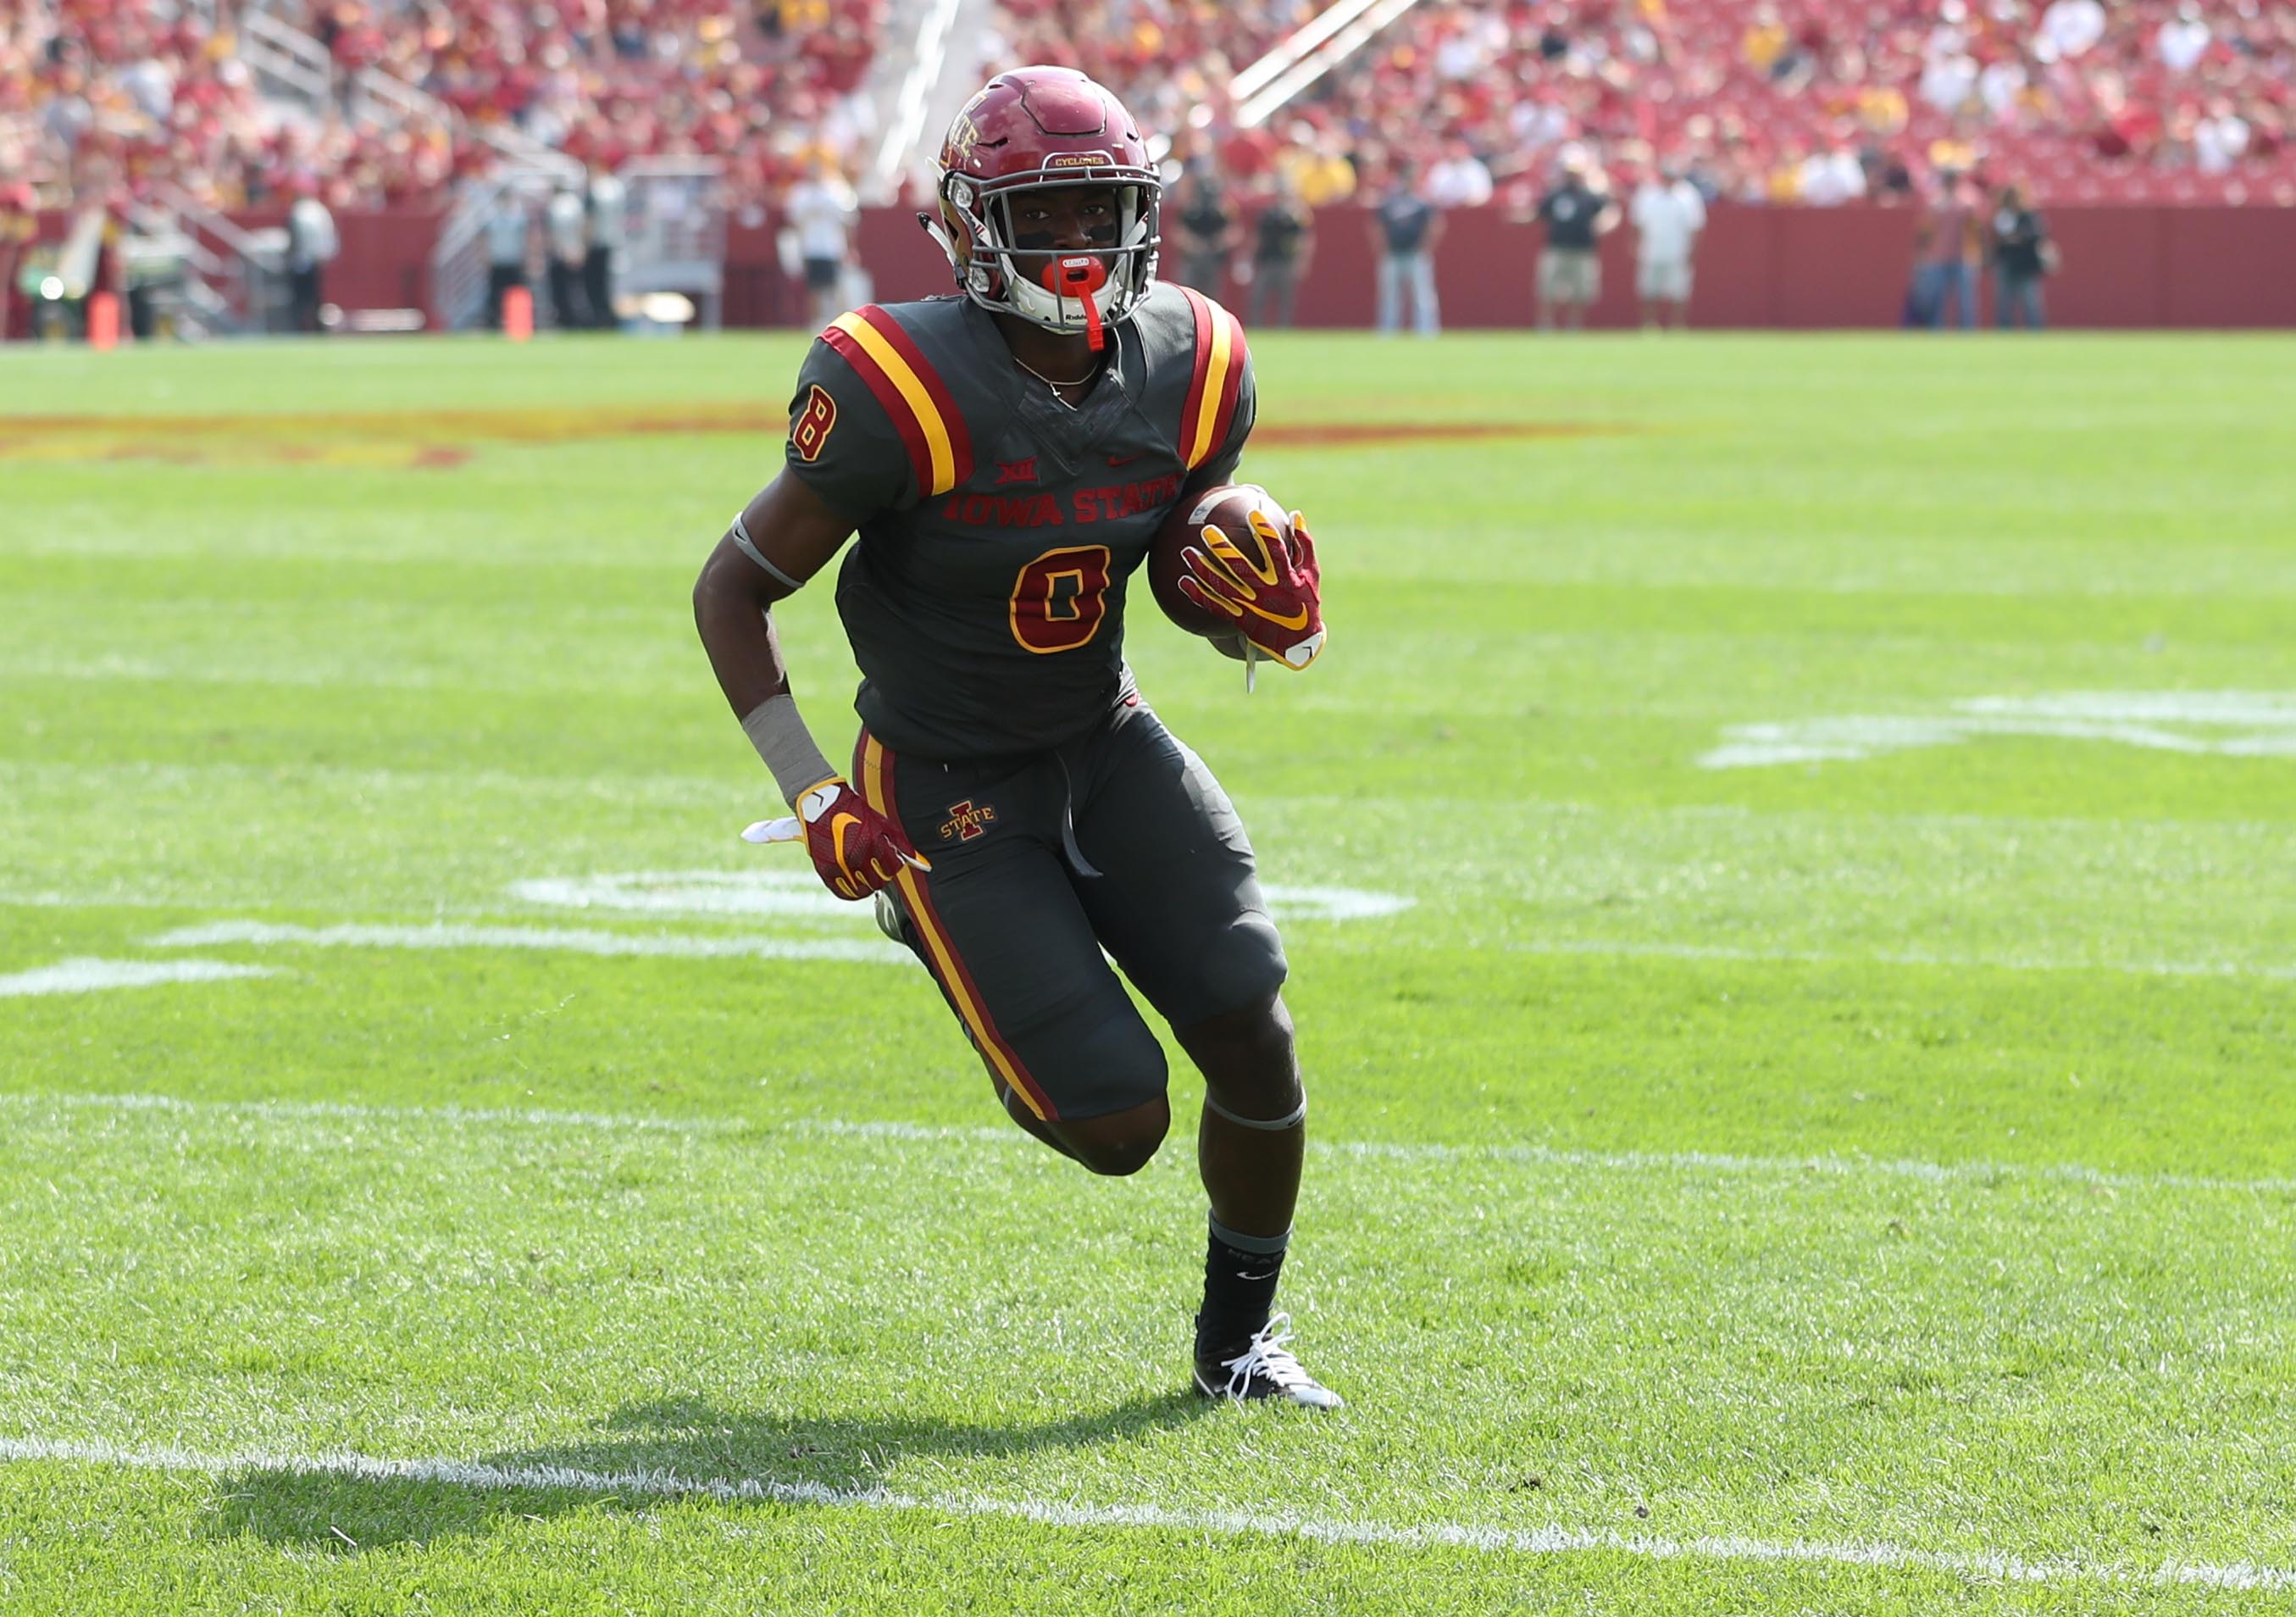 Sep 24, 2016; Ames, IA, USA; Iowa State Cyclones wide receiver Deshaunte Jones (8) gets the corner for a touchdown against the San Jose State Spartans at Jack Trice Stadium. The Cyclones beat the Spartans 44-10. Mandatory Credit: Reese Strickland-USA TODAY Sports